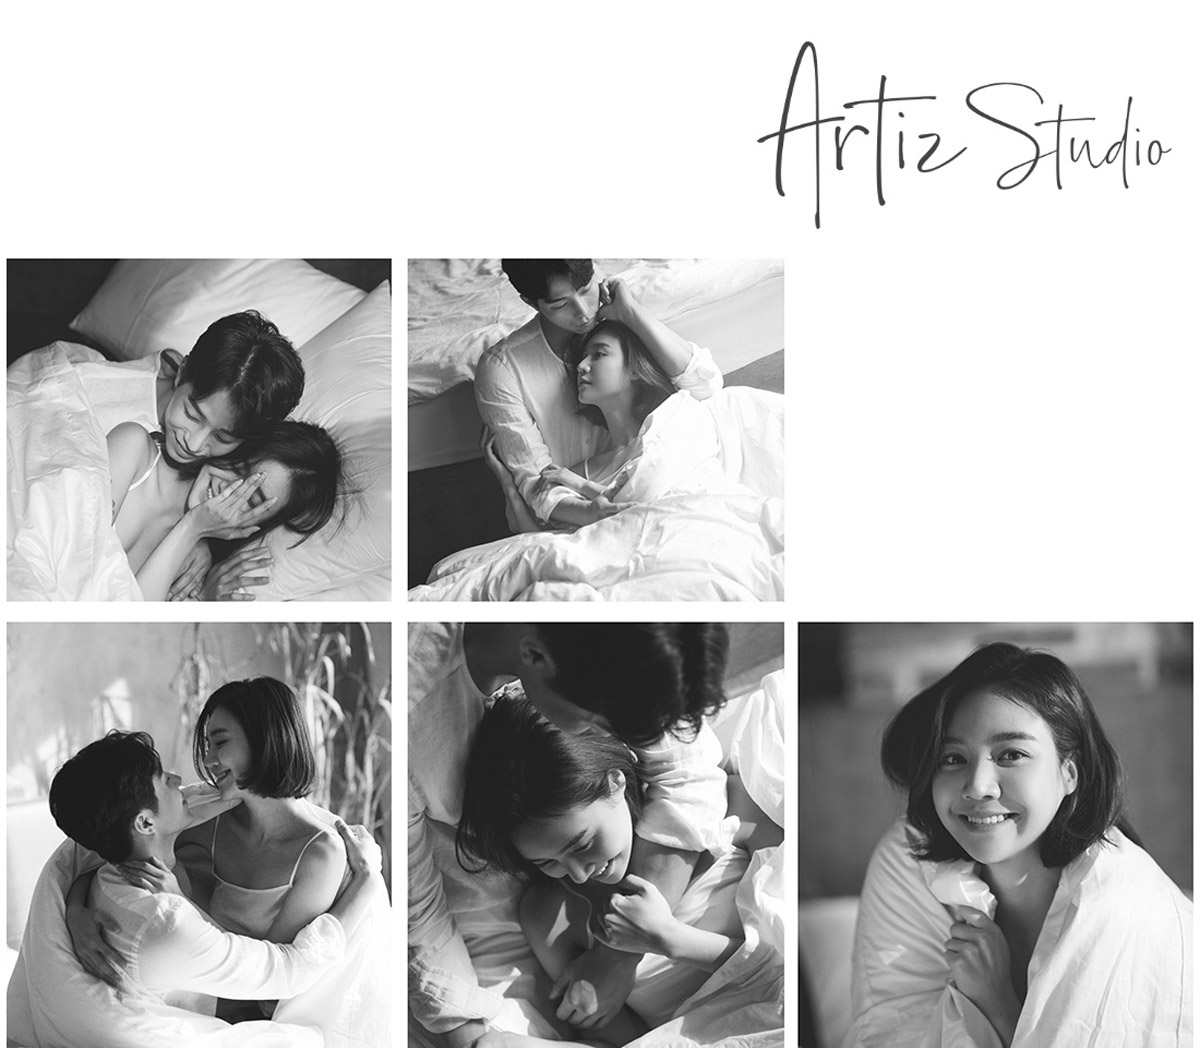 4 Upcoming 2021/22 Korean-style Wedding Shoot Concepts Available for Brides-to-be Right Here in Singapore